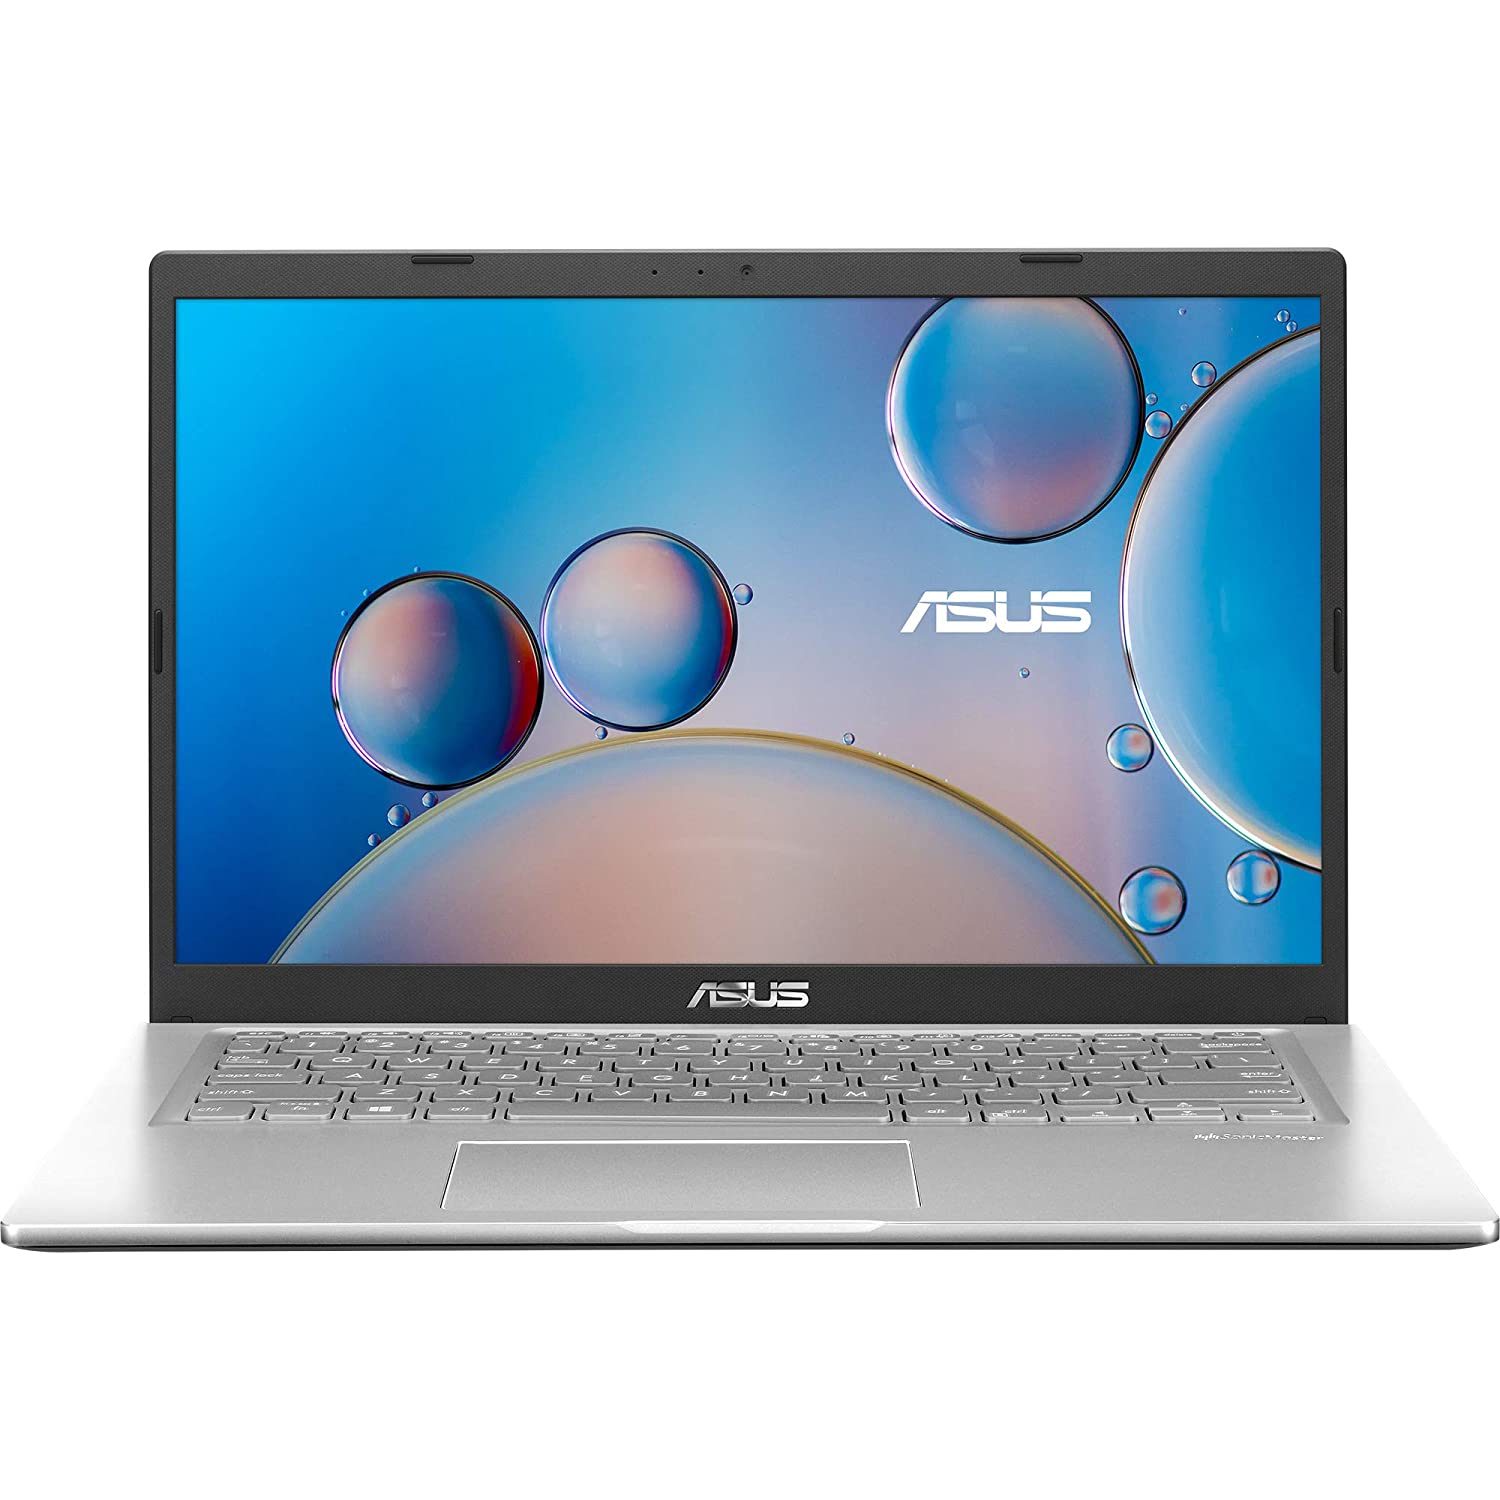 ASUS VivoBook 15 (2022) Intel Core i5 11th Gen - (8 GB/1 TB HDD/256 GB SSD/Windows 11 Home) X515EA-EJ502WS Thin and Light Laptop (15.6 inch (40 cm) Transparent Silver, 1.80 kg, with MS Office)